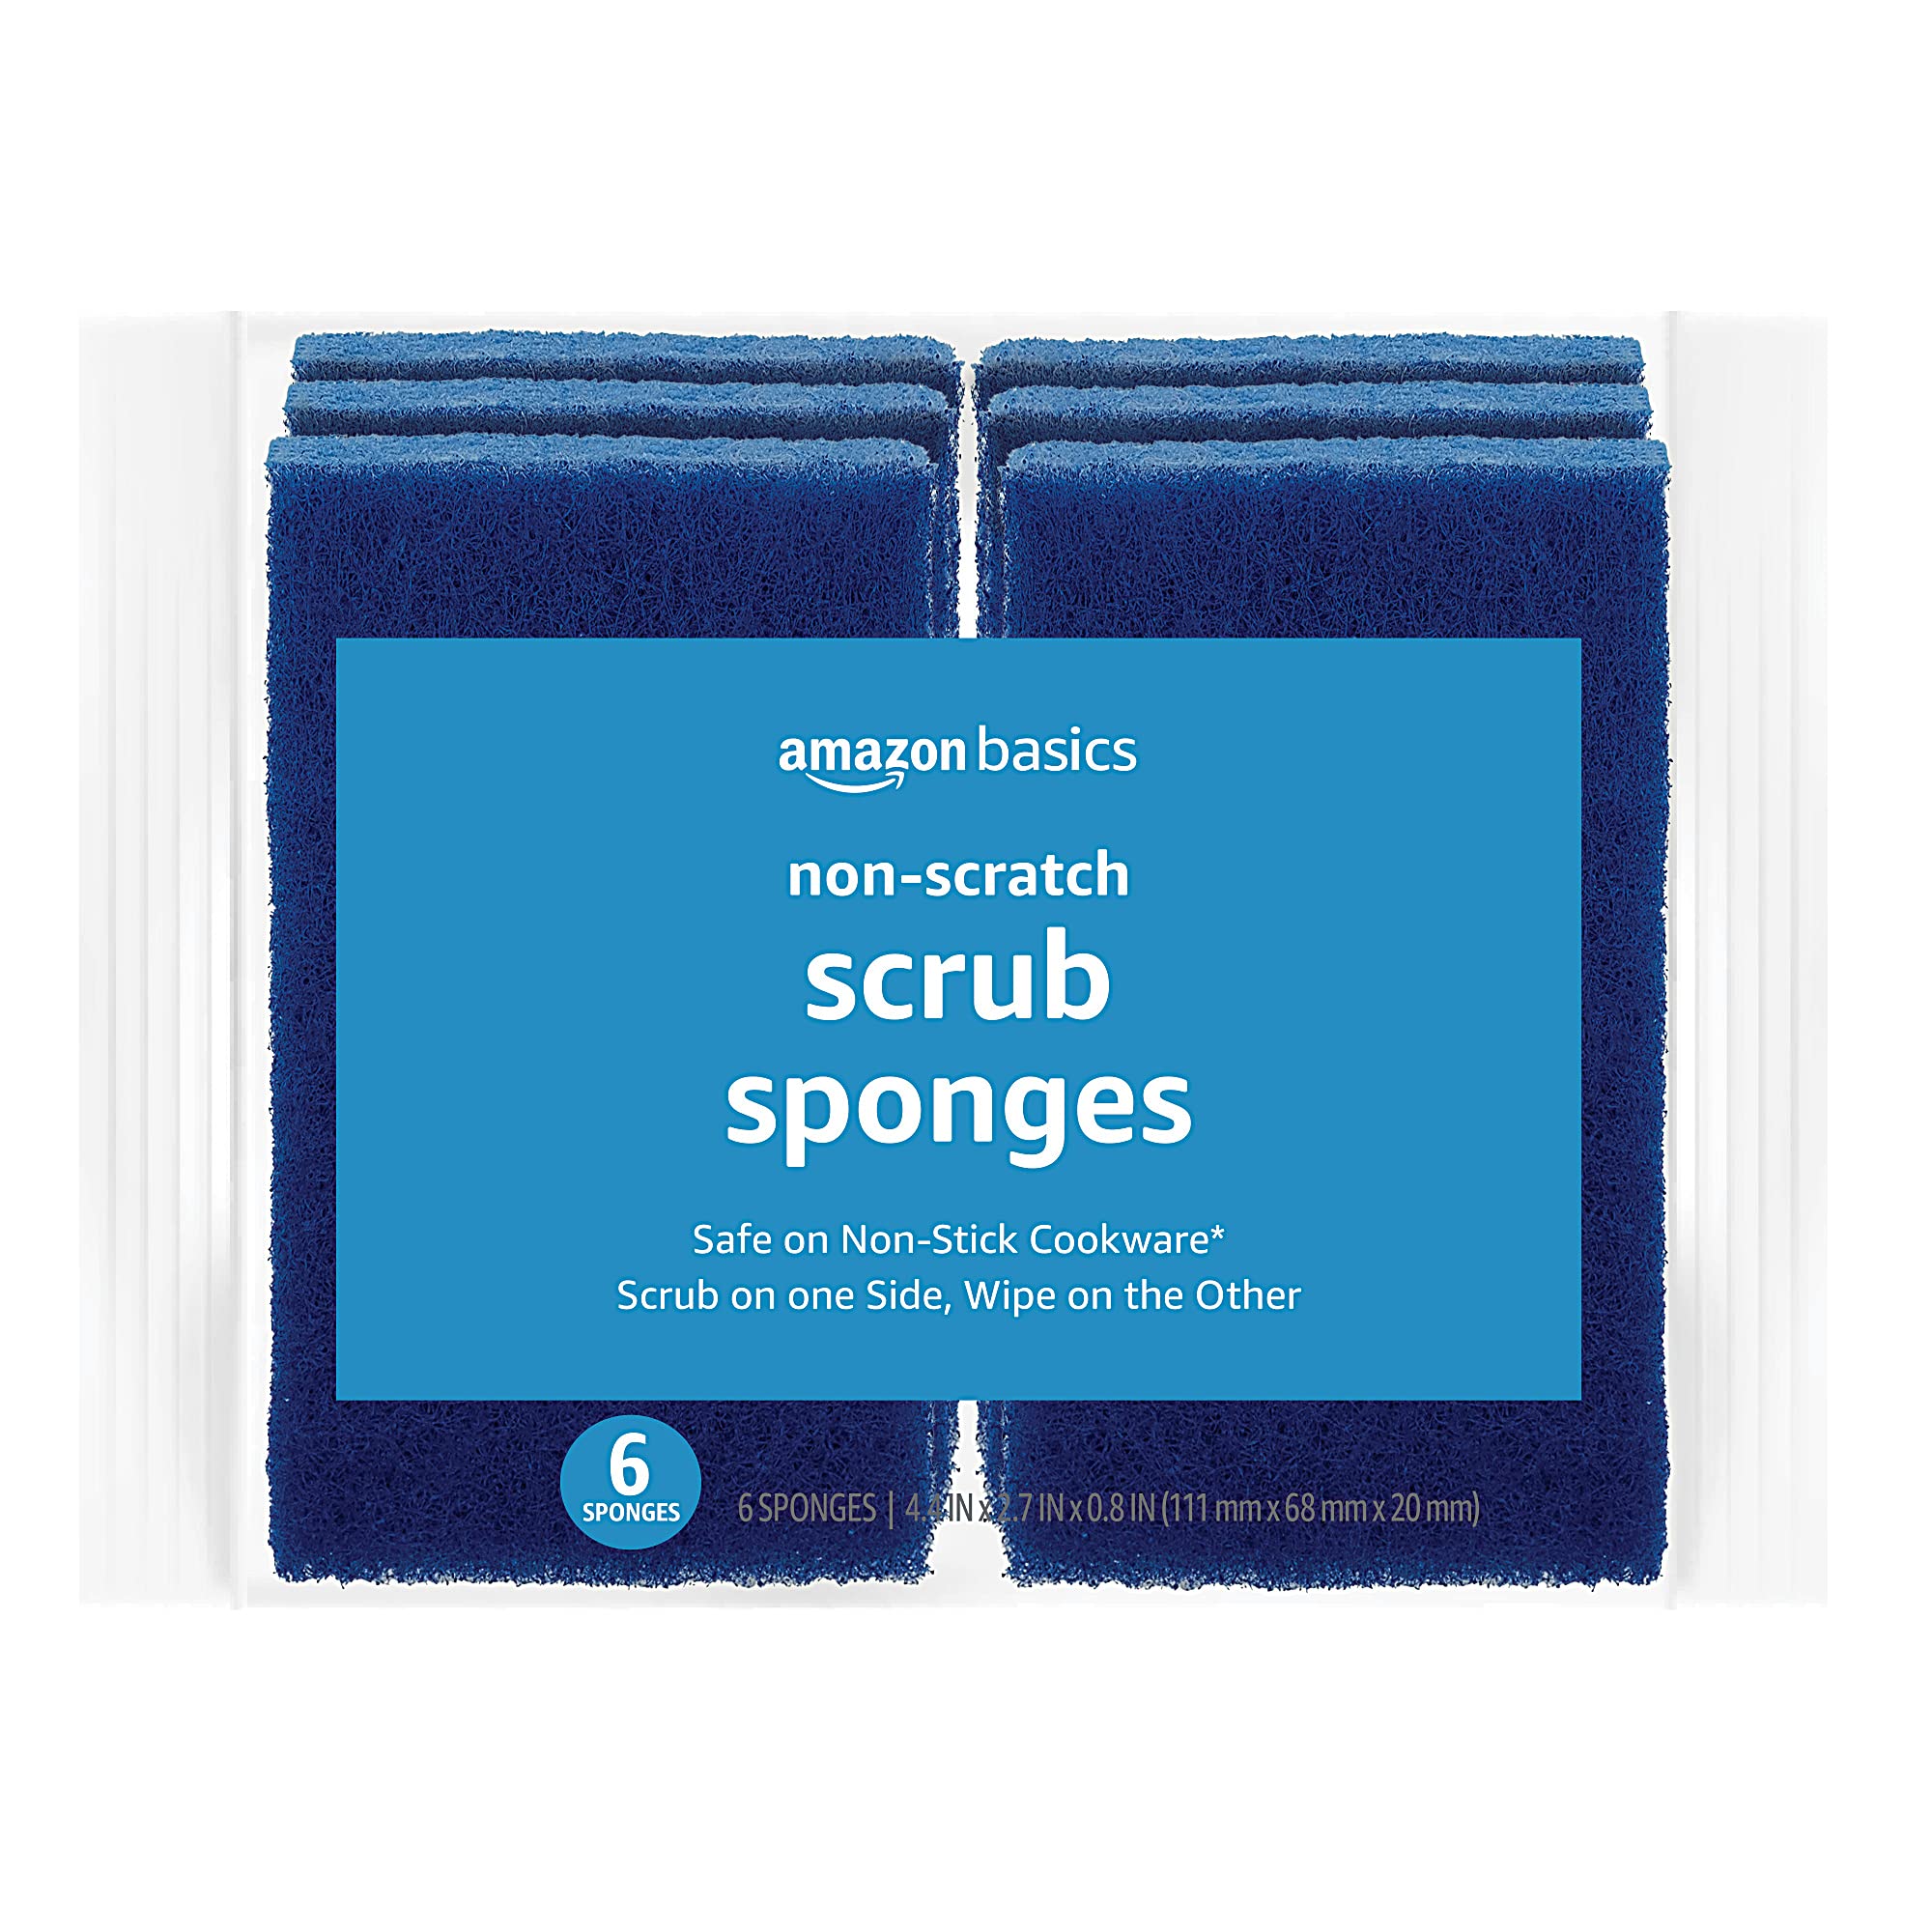 6-Pack Amazon Basics Sponges (Non-Scratch or Heavy Duty) $3.26 w/ S&S + Free Shipping w/ Prime or on orders over $25